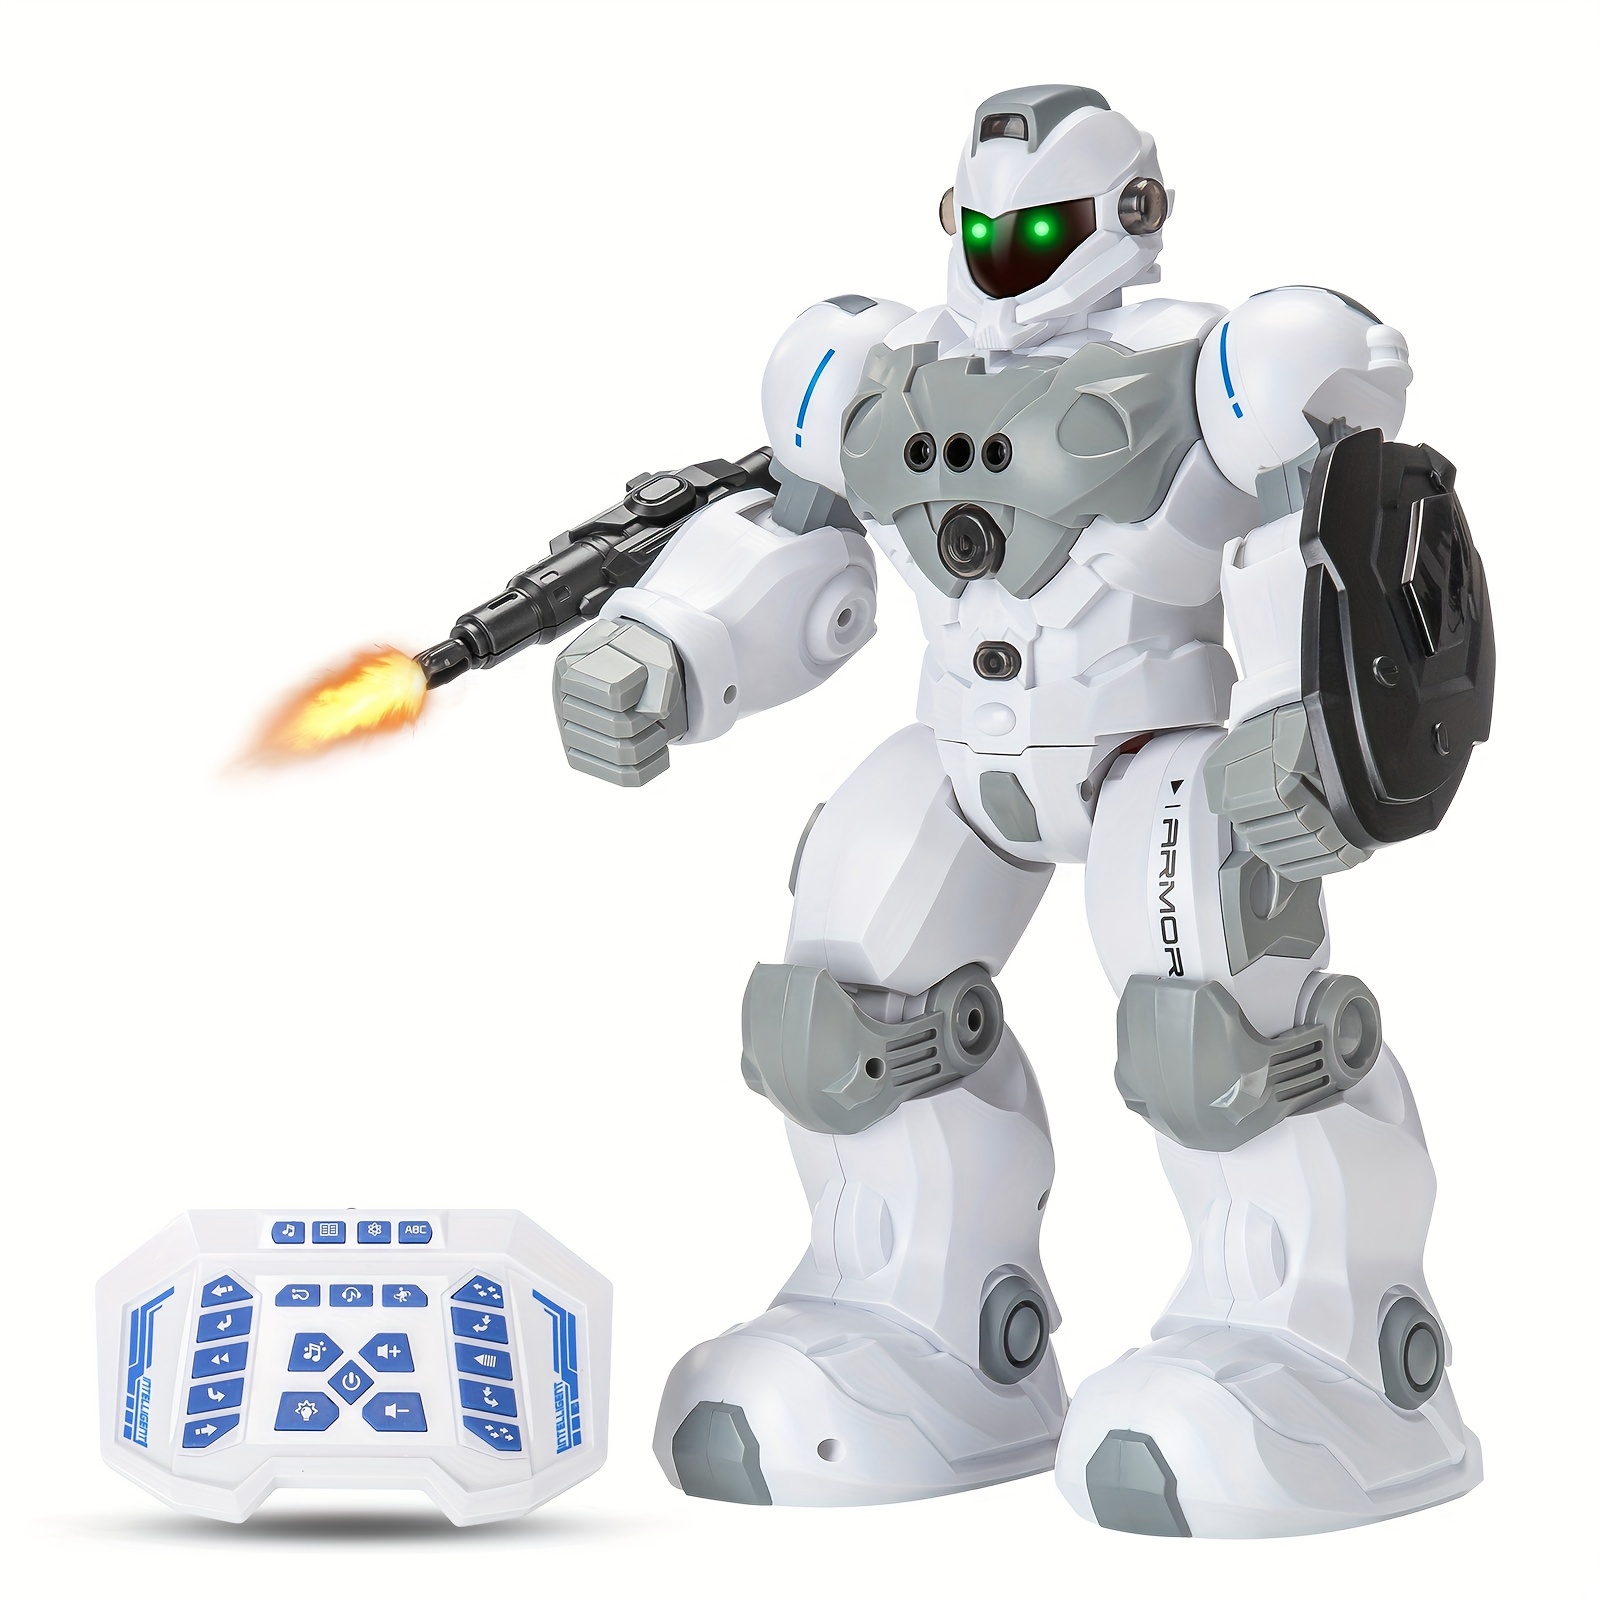 

Control Robot Toys For Kids: Intelligent Programmable Robot Gifts For Kids Popular Science Story Toys With 2.4ghz Wifi Signal Gesture Sensing For Kids